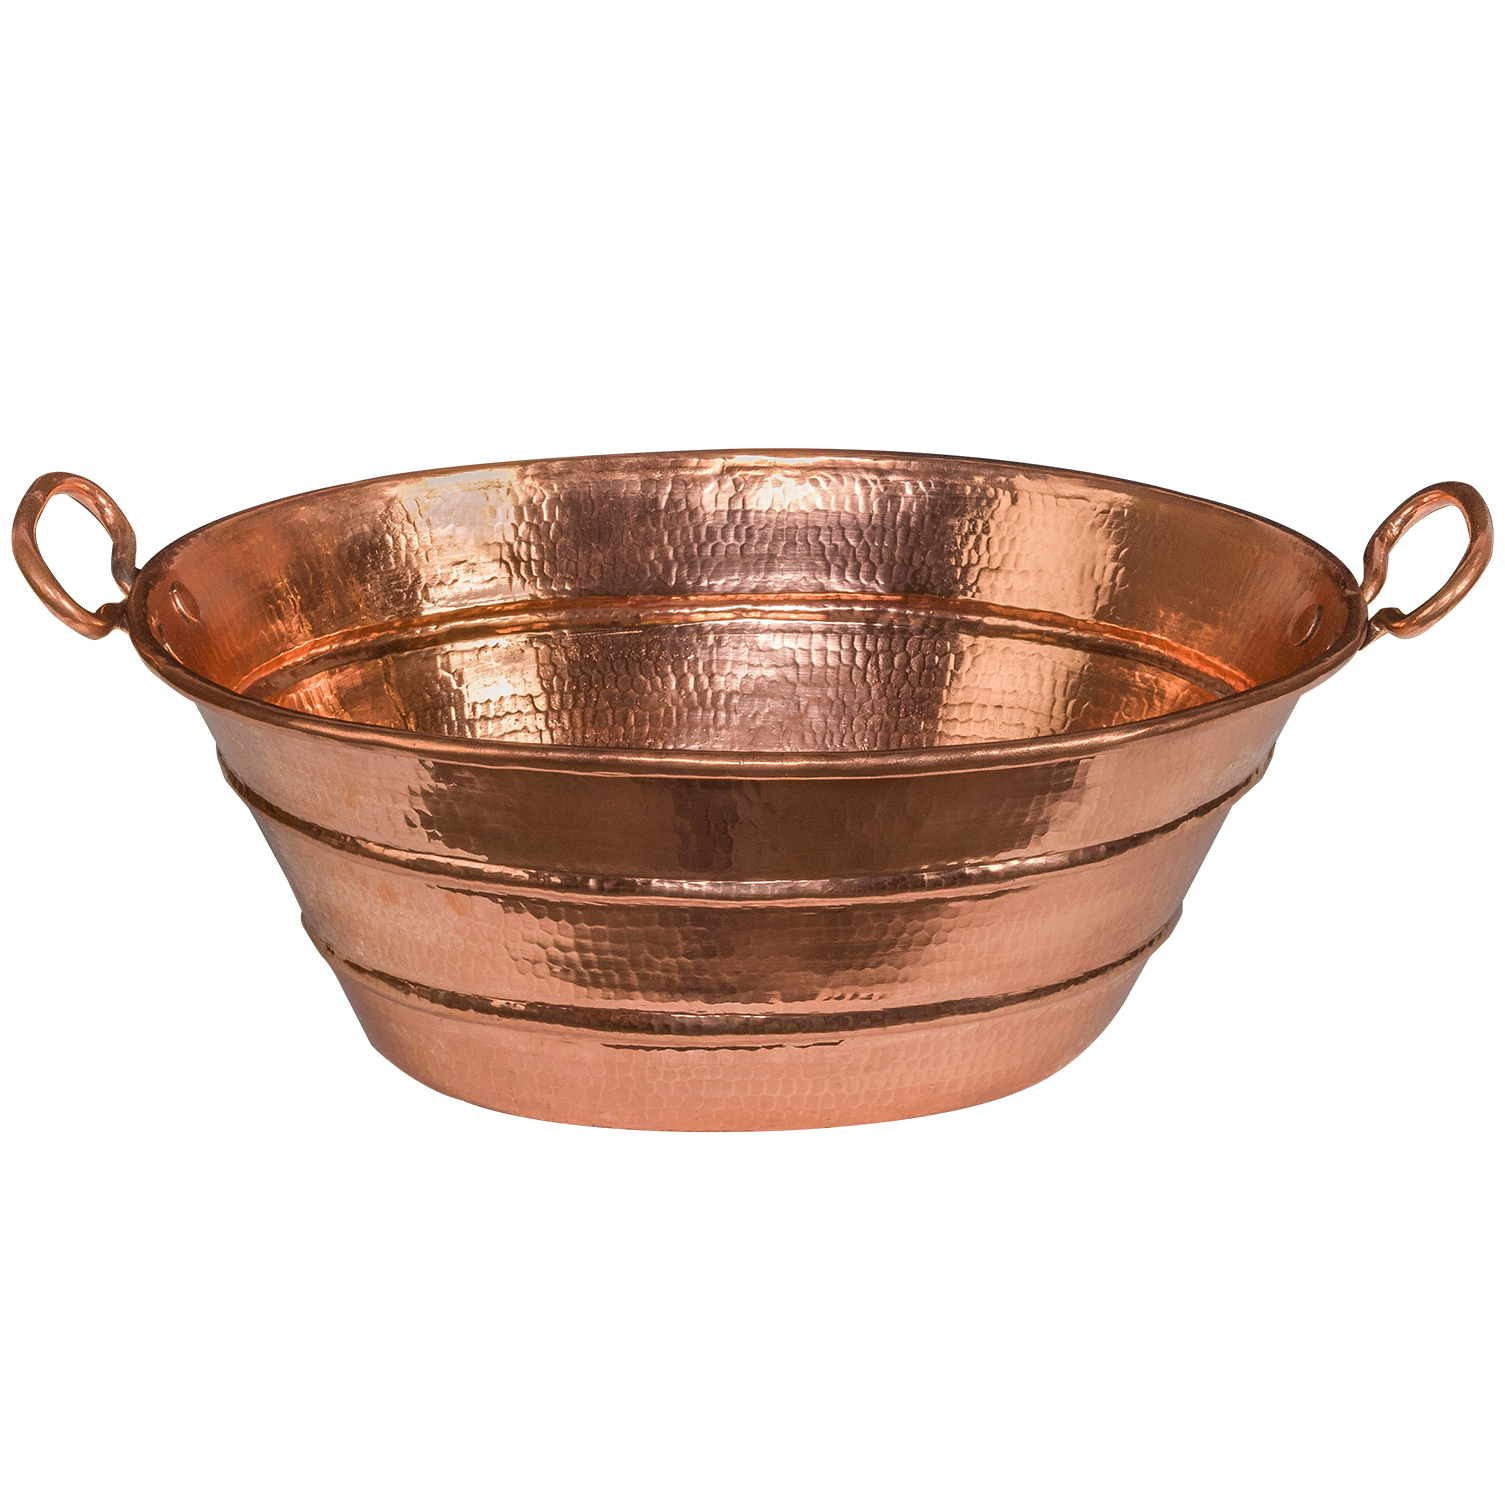 Oval Bucket Vessel Hammered Copper Sink With Handles In Polished Copper